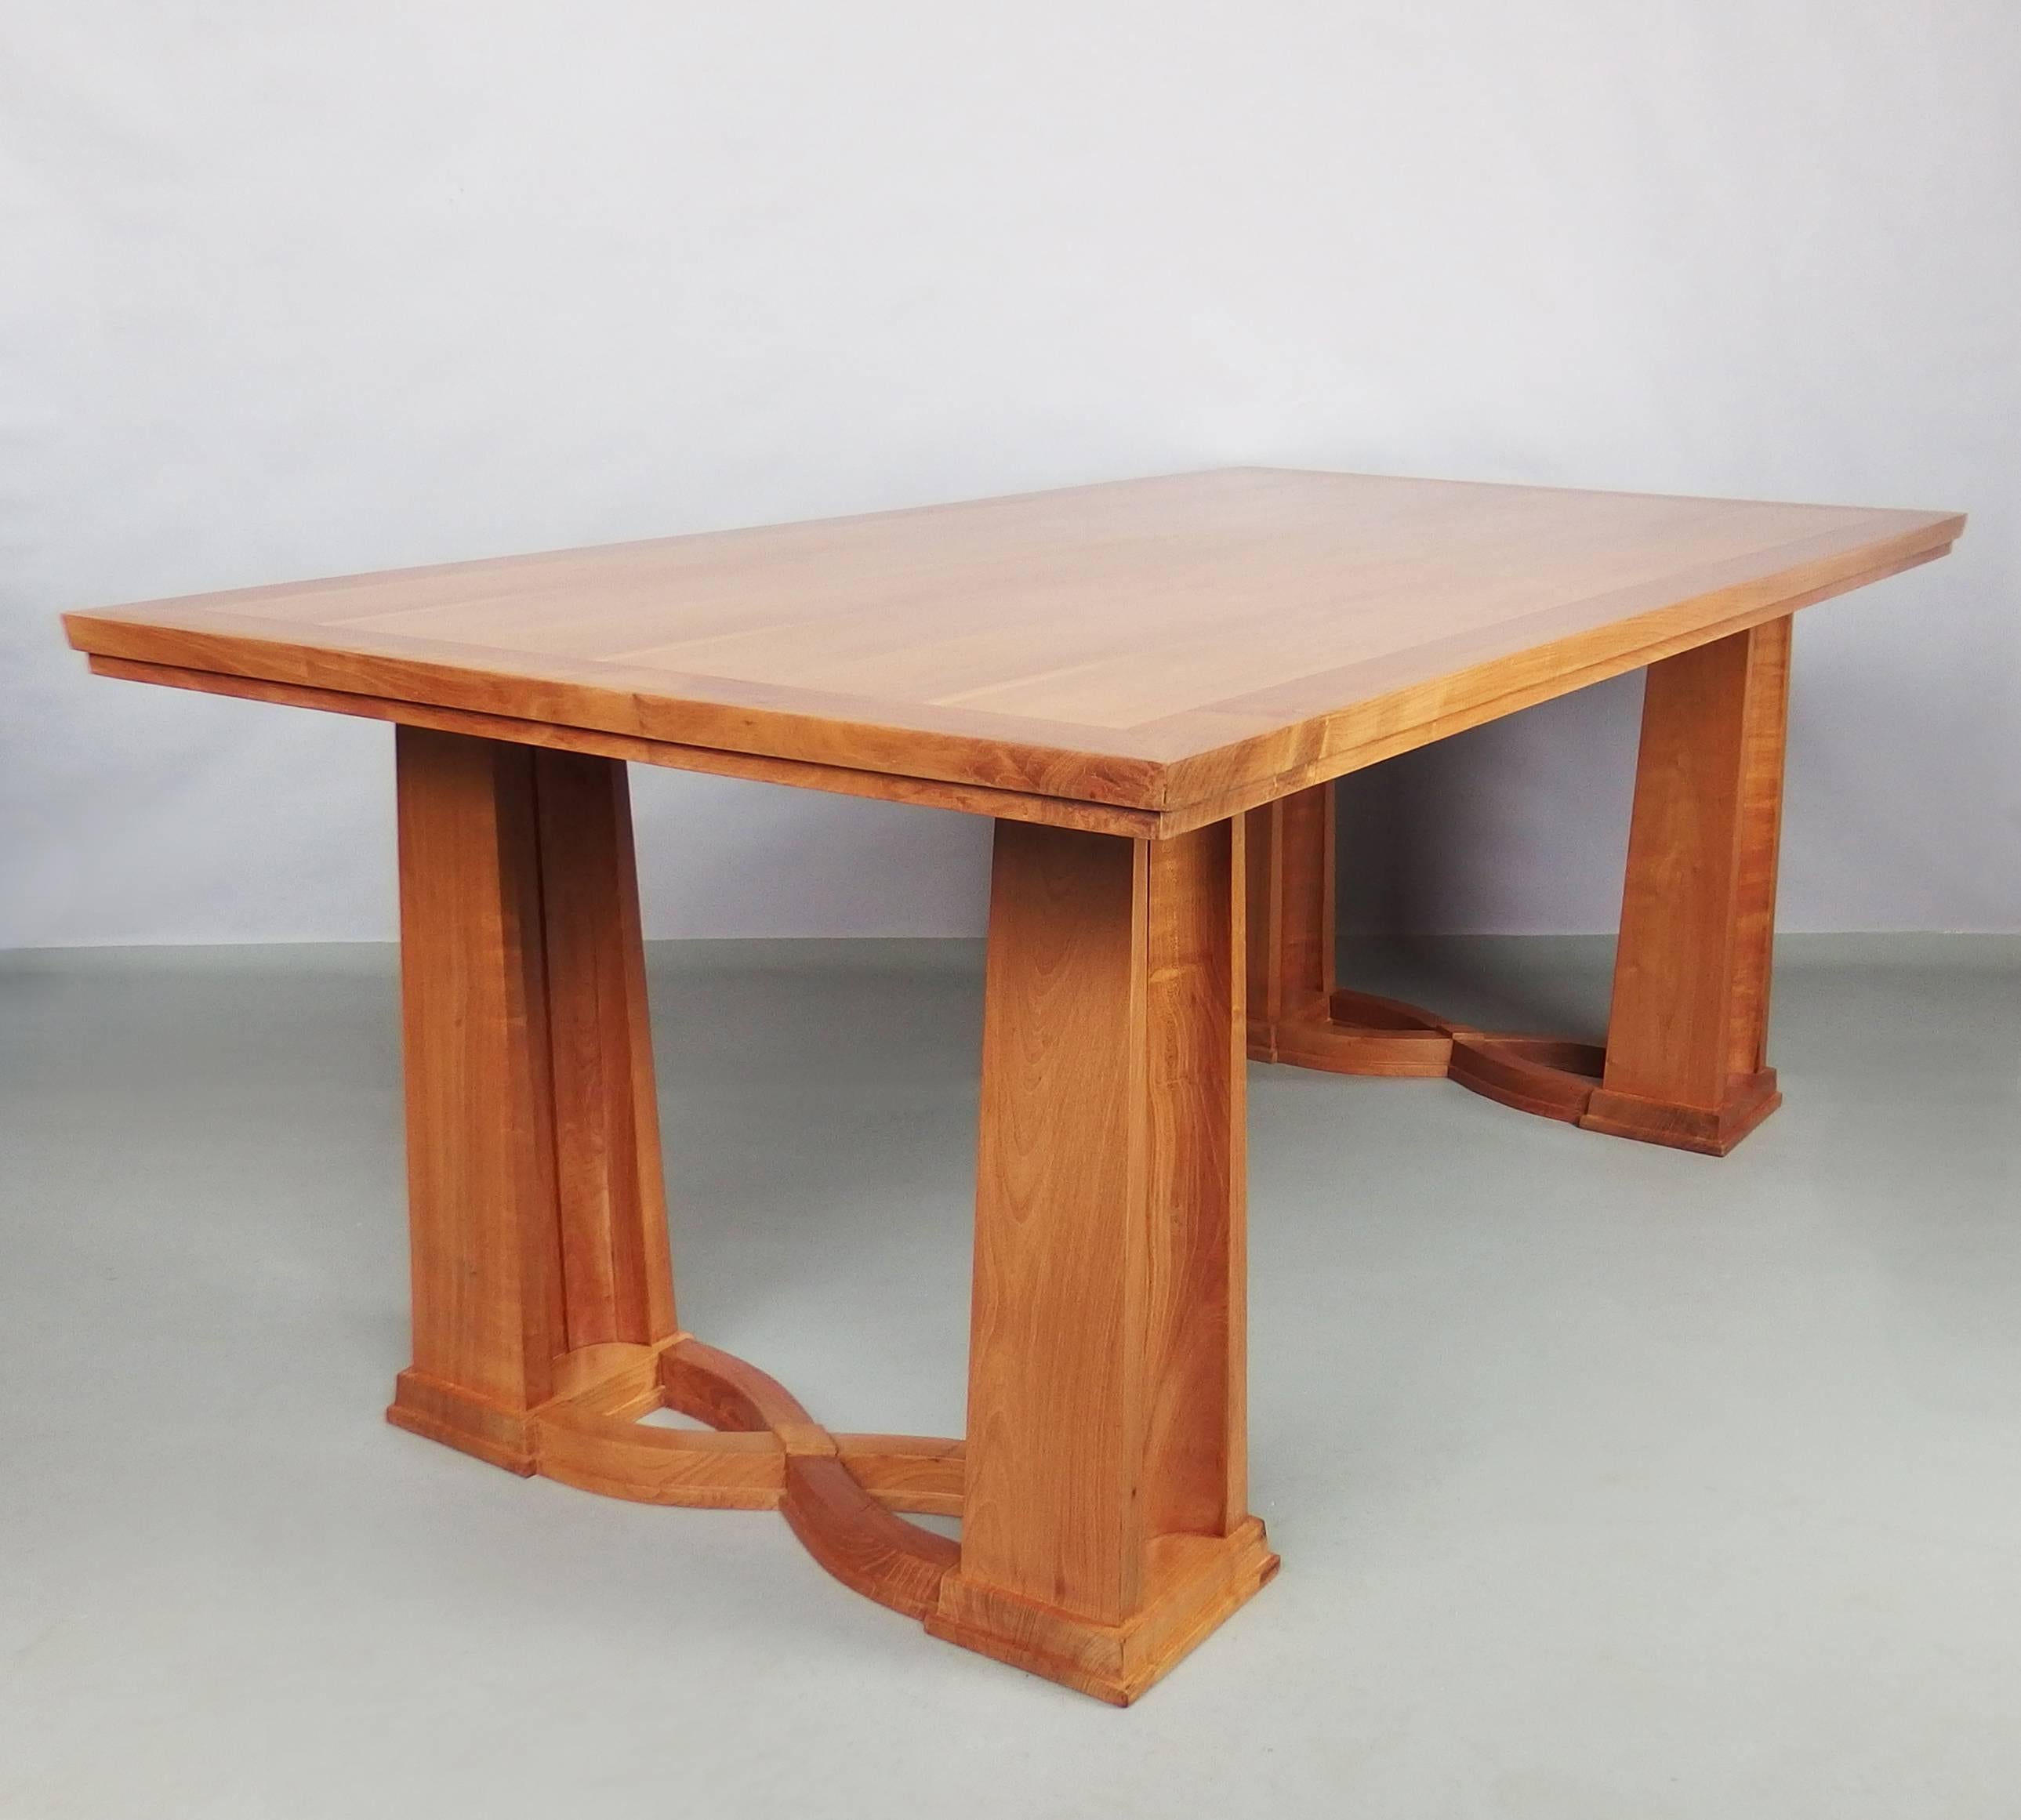 A fine dining or writing table in cherrywood with curved lines on feet and pedestals.